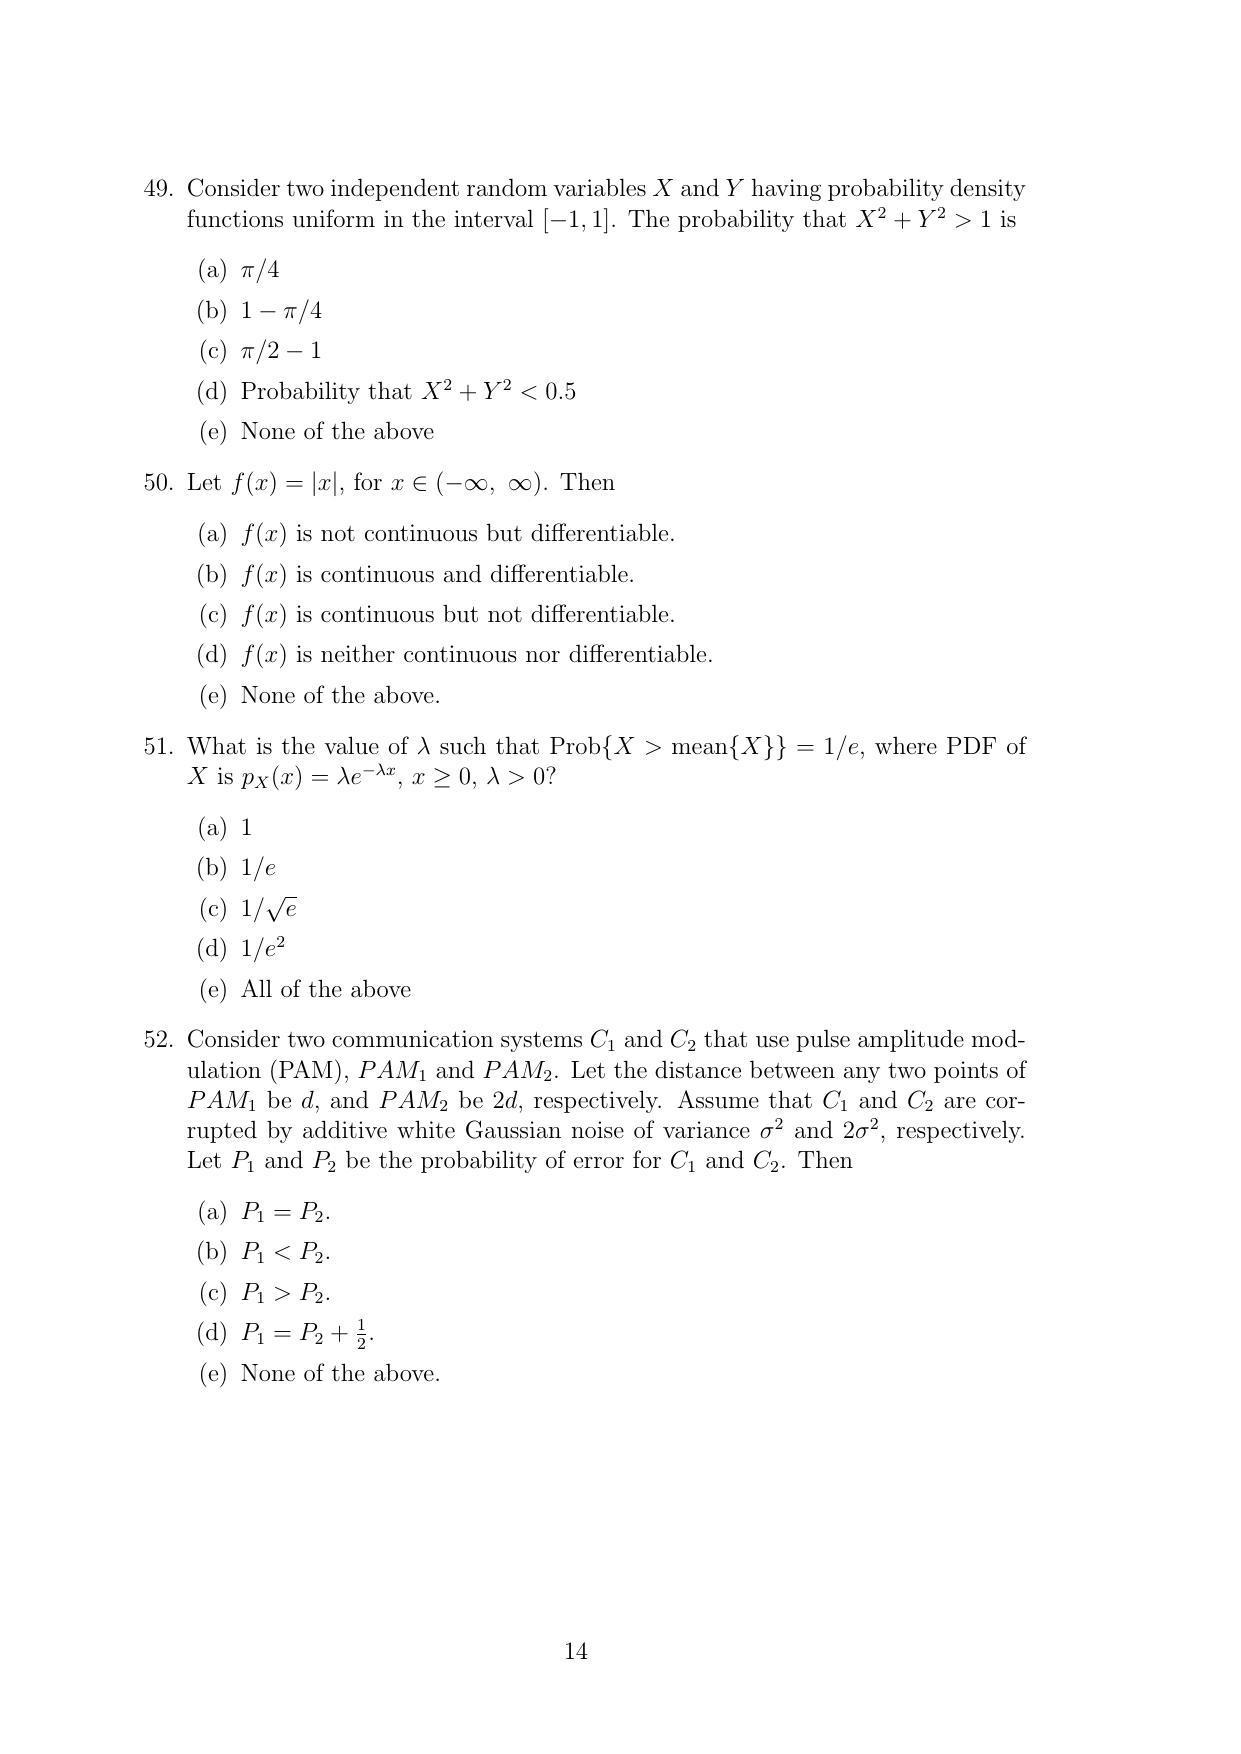 TIFR GS 2011 Computer & Systems Sciences Question Paper - Page 14